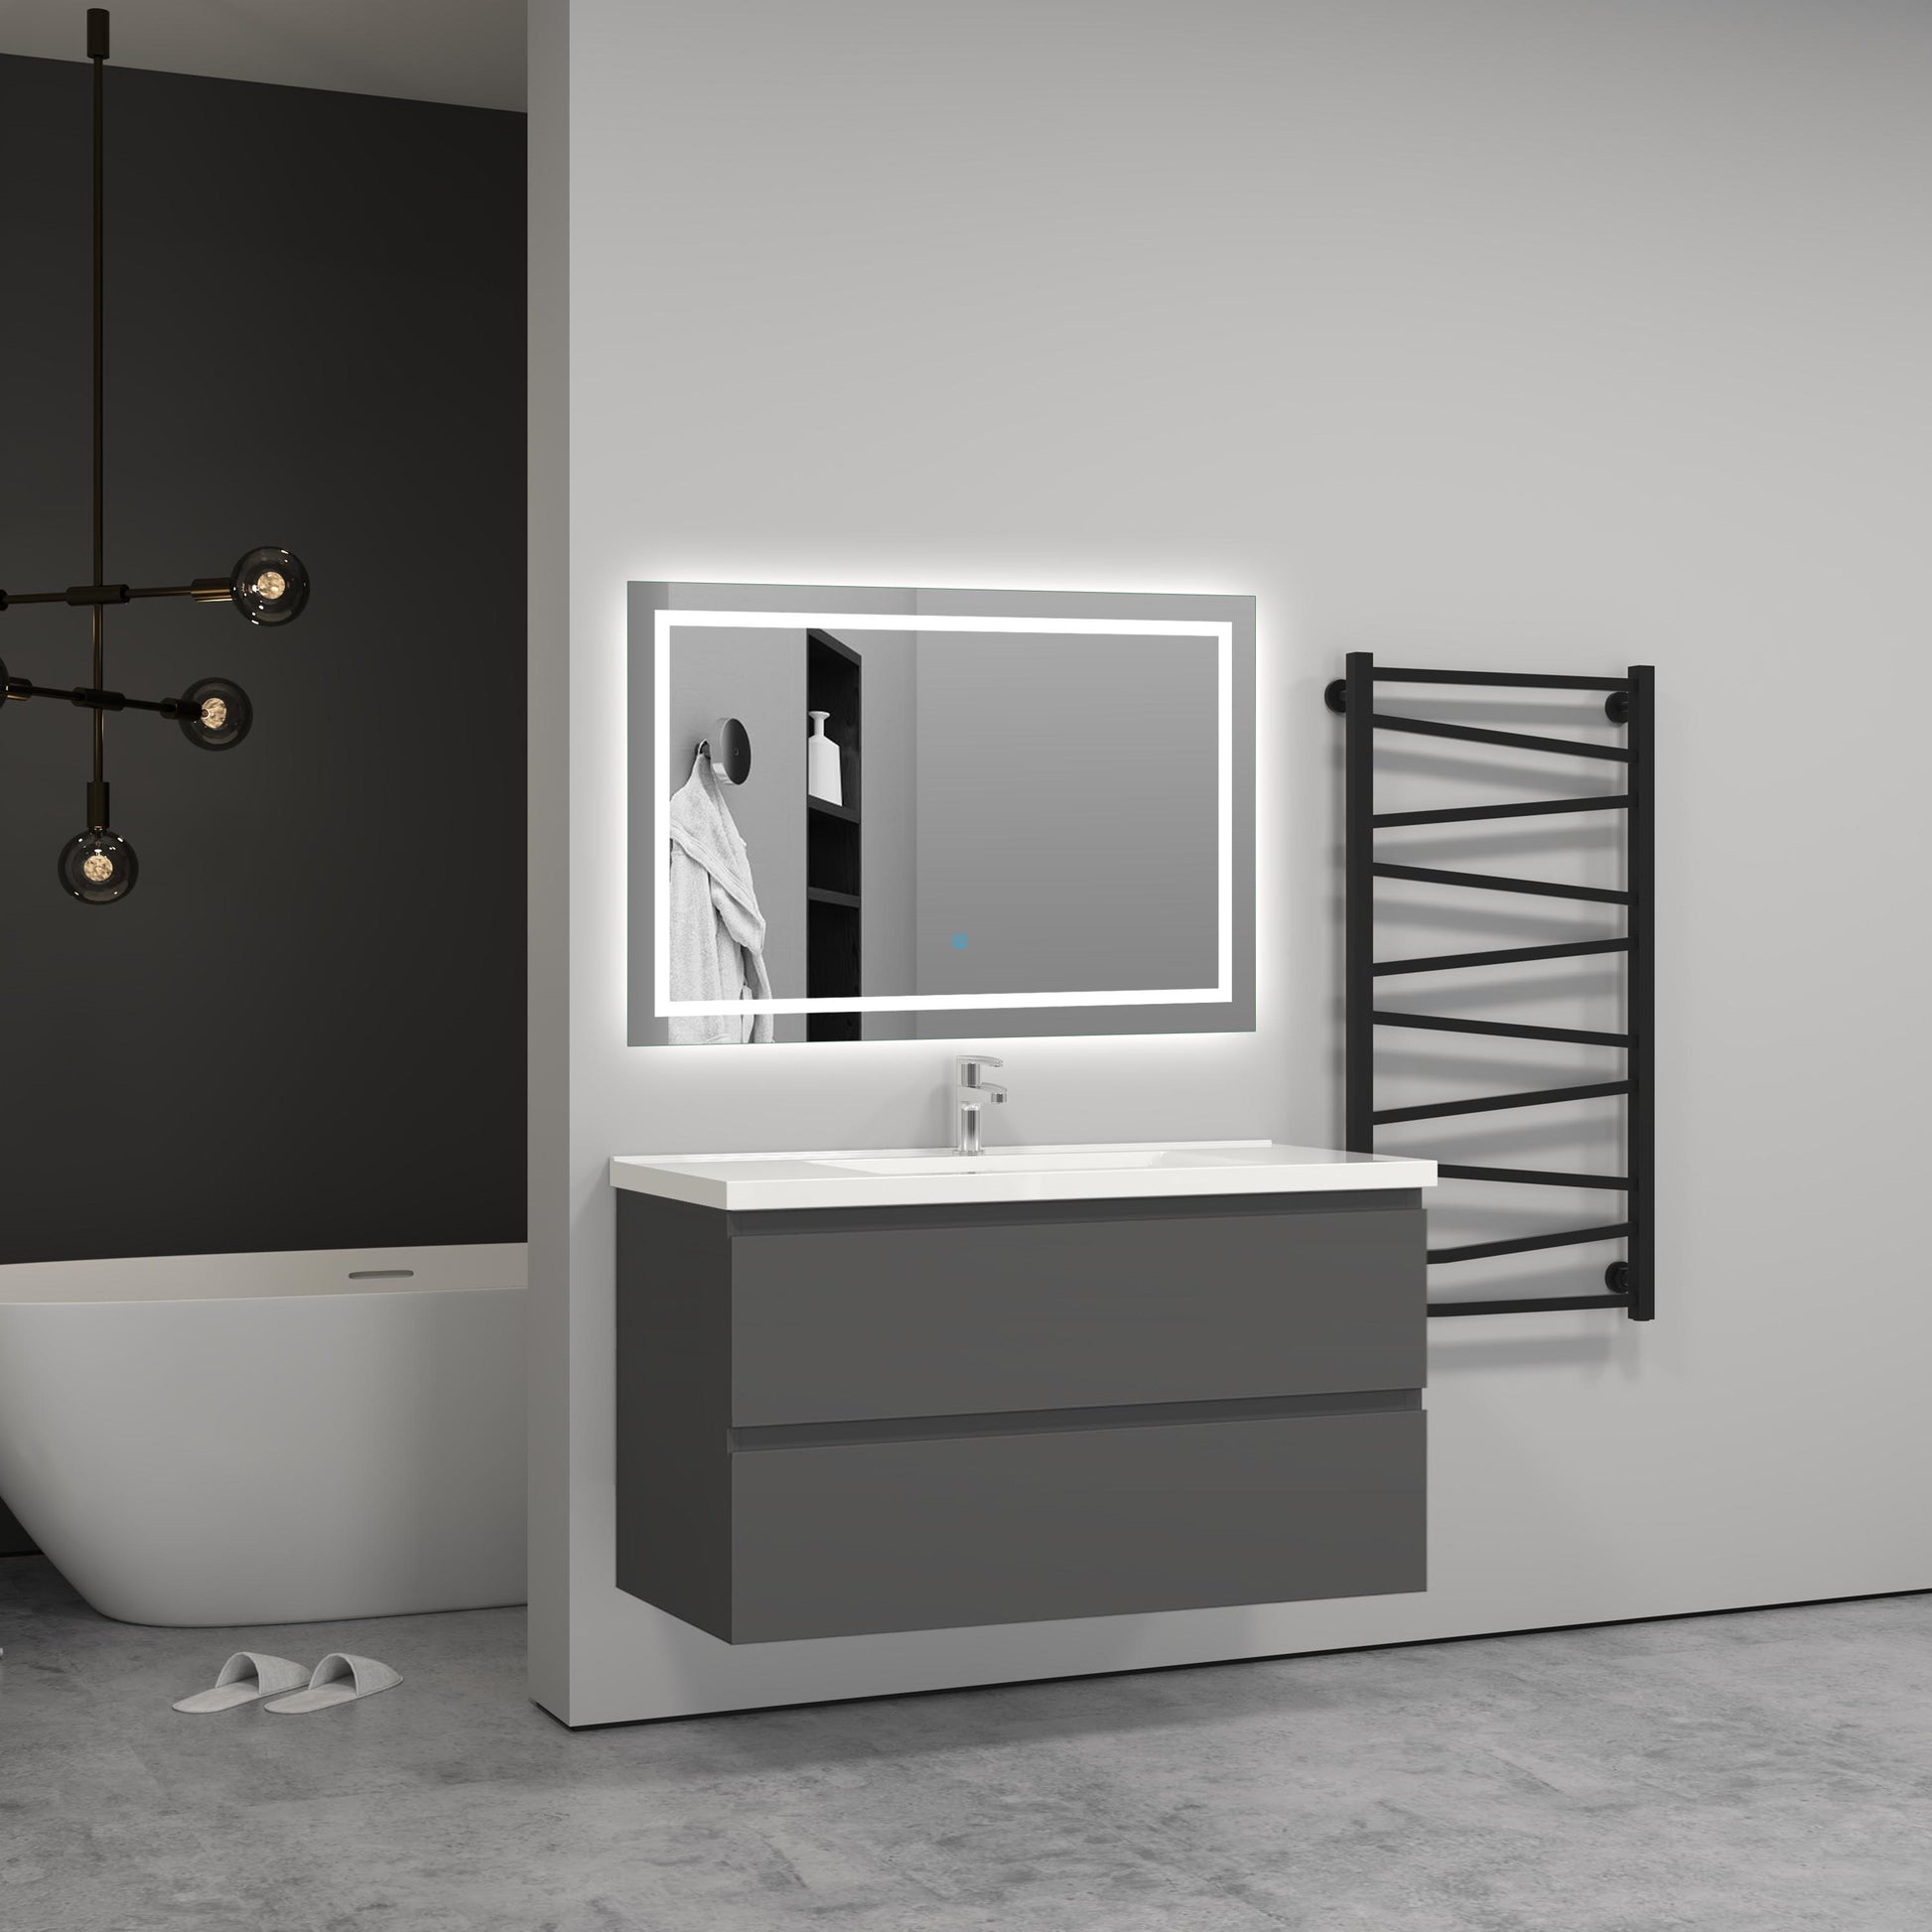 1000mm Wide Wall Mounted Vanity Units and Sink 2 Drawers - Matt Grey